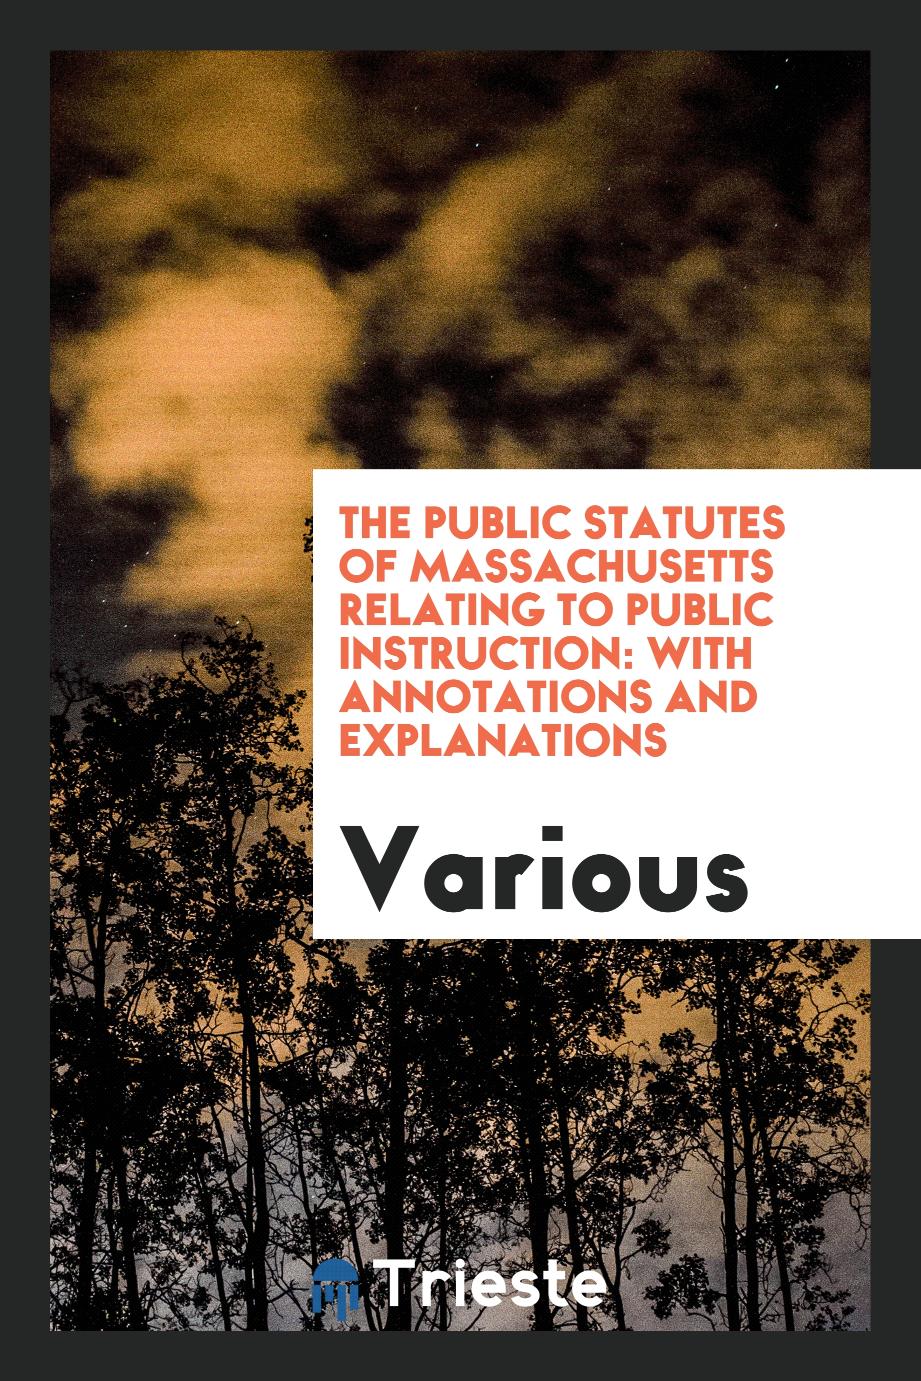 The Public Statutes of Massachusetts Relating to Public Instruction: With annotations and explanations